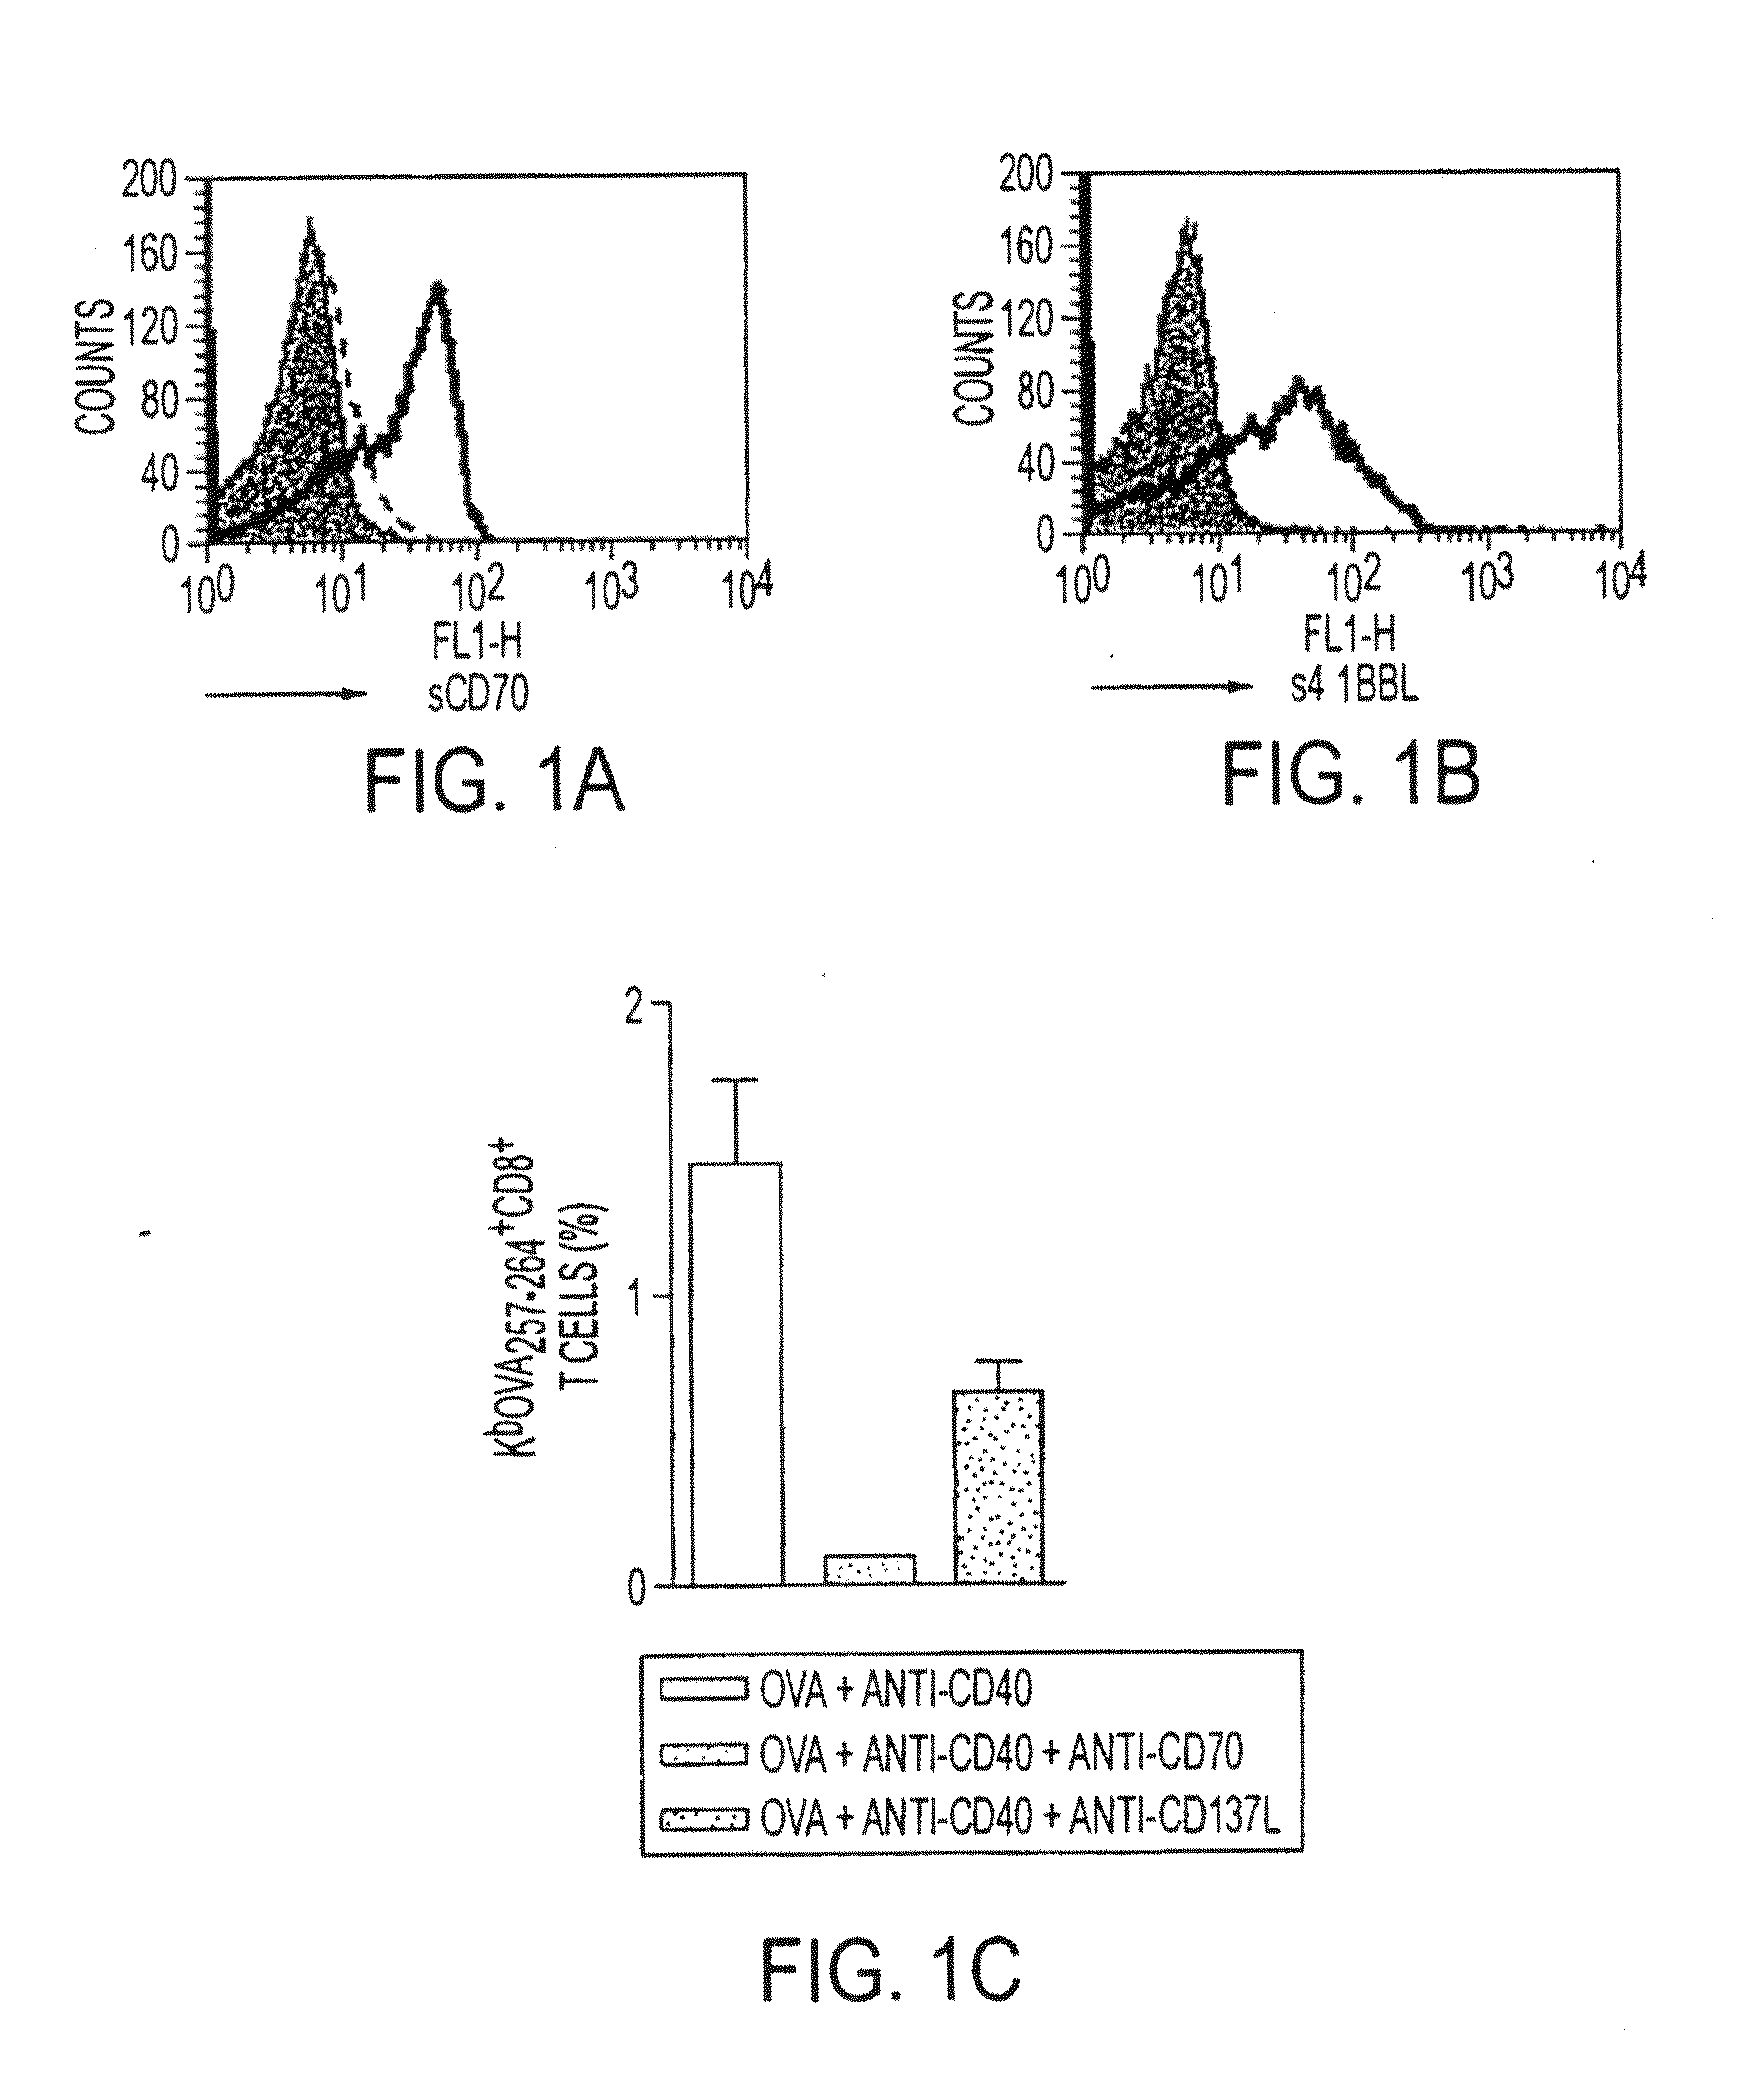 Human immune therapies using a cd27 agonist alone or in combination with other immune modulators